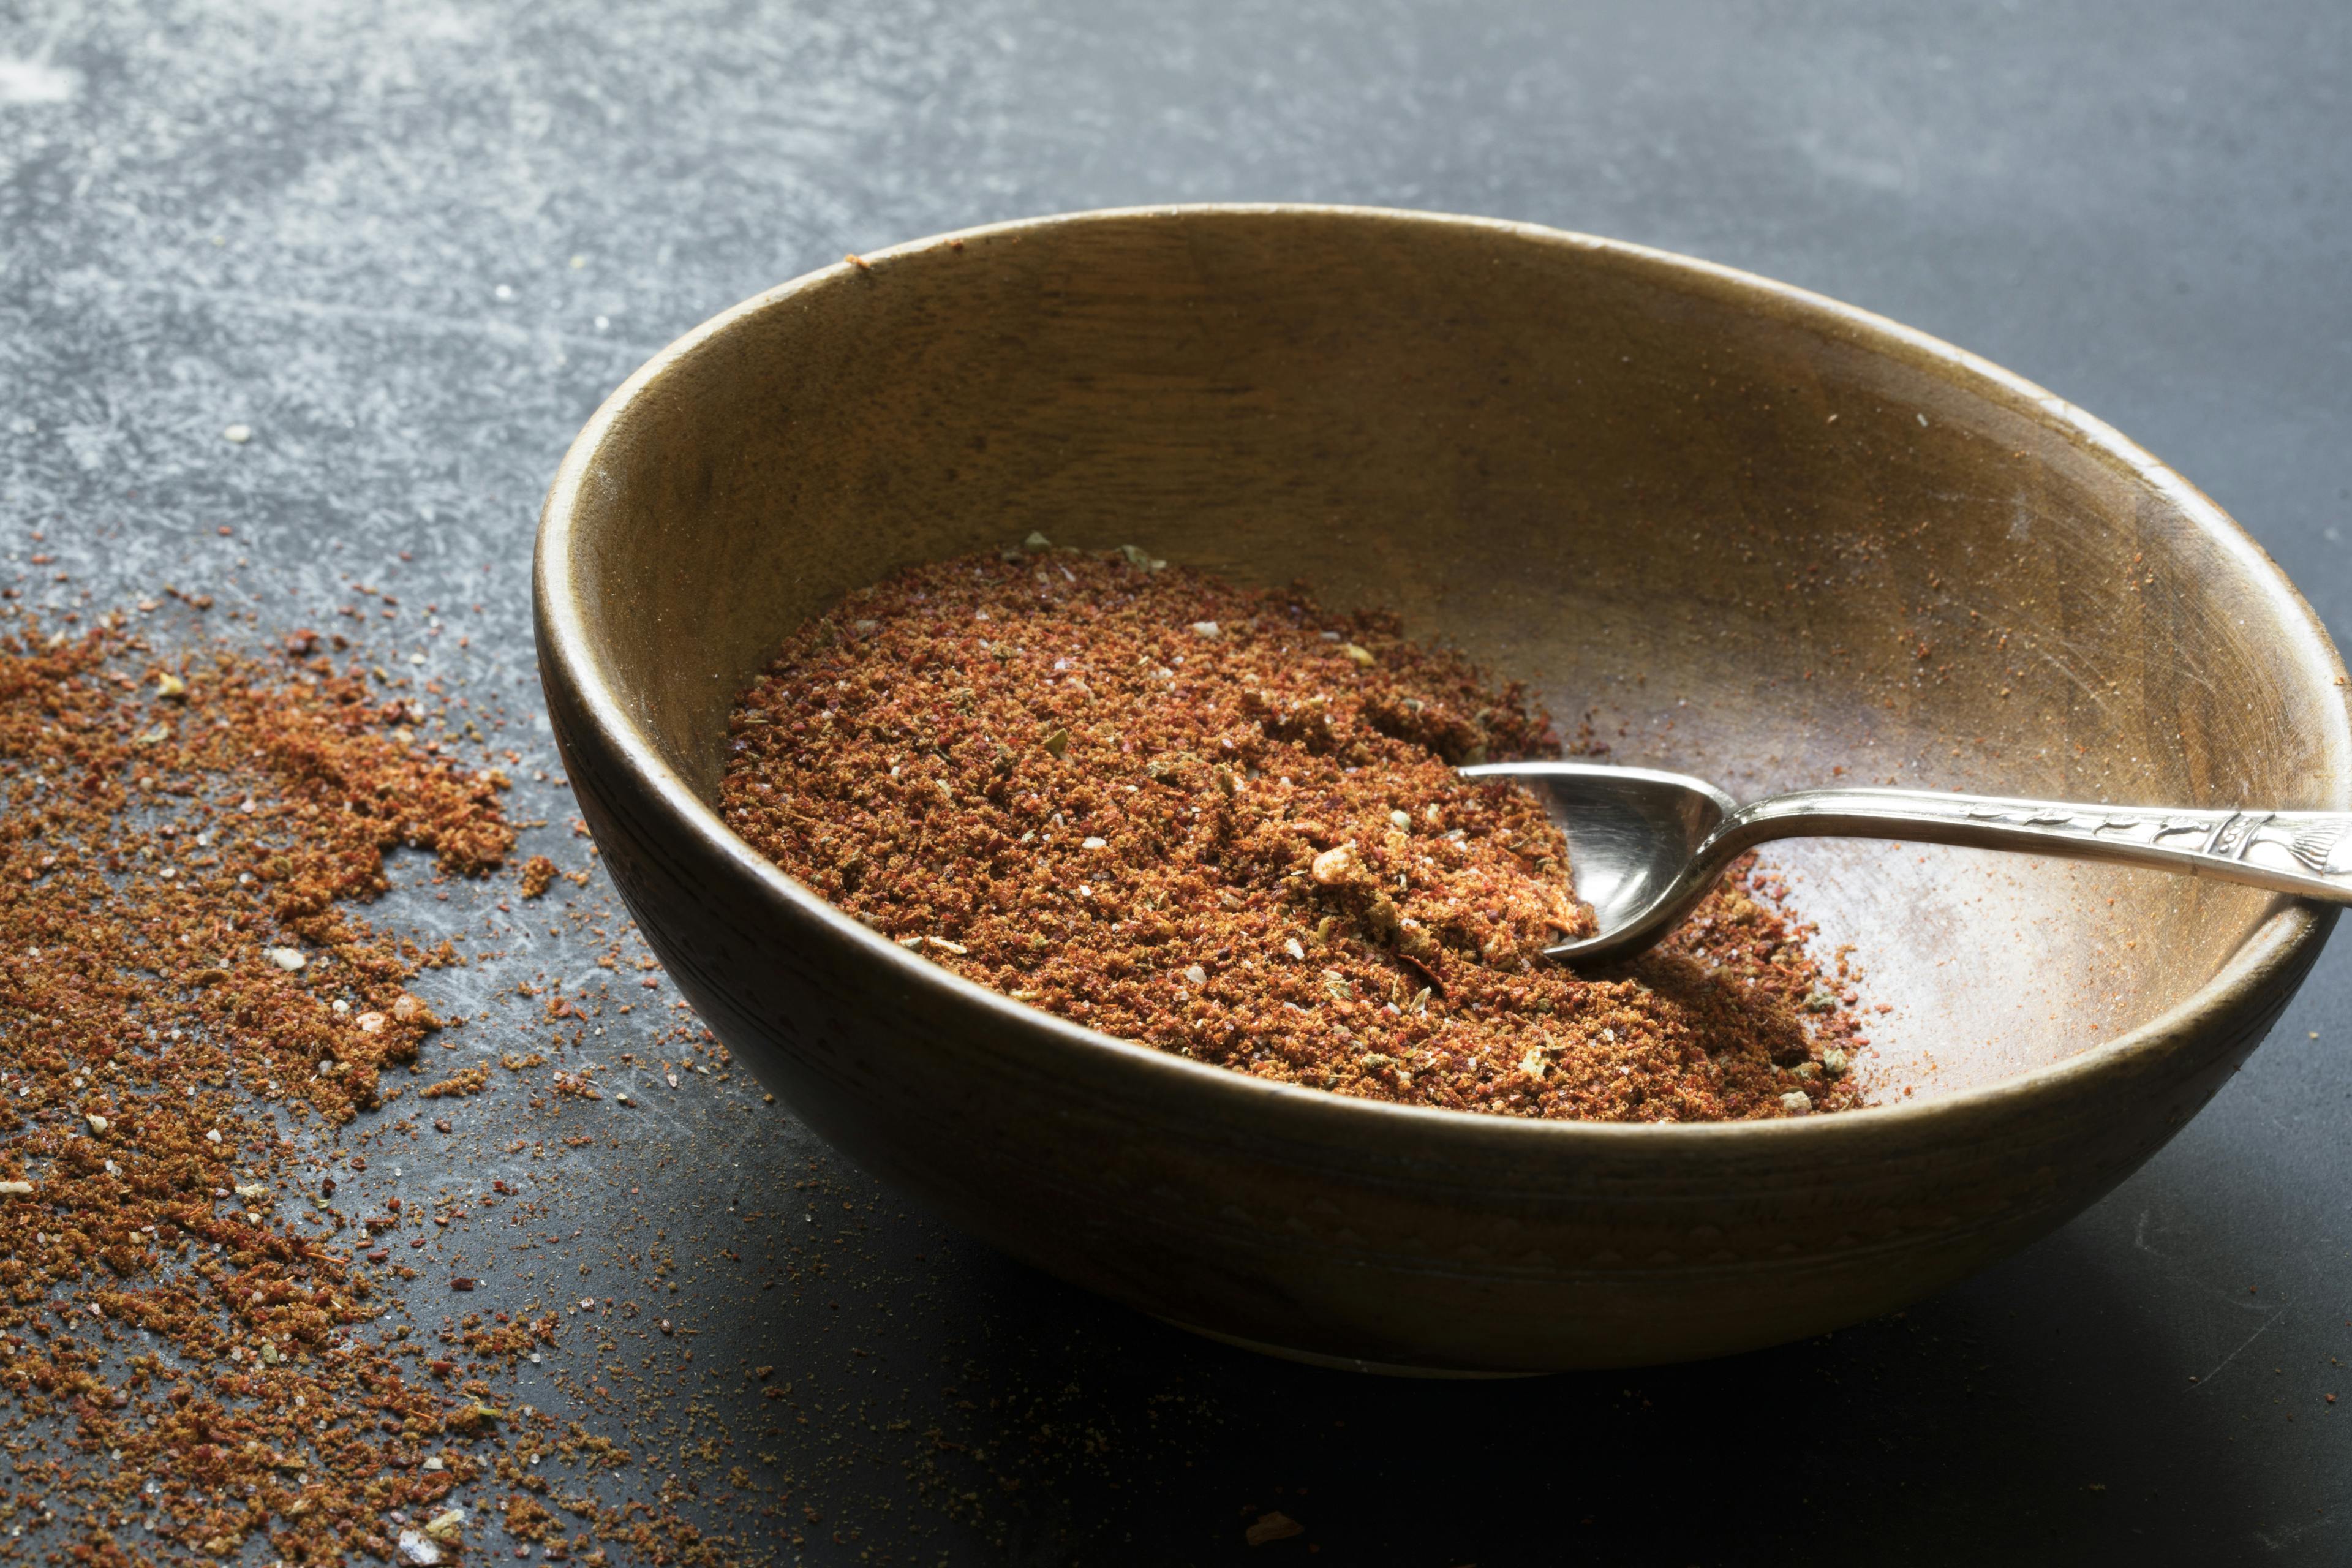 A homemade blend of spices to create your own taco seasoning at home. Adjust the quantities as desired for taste.